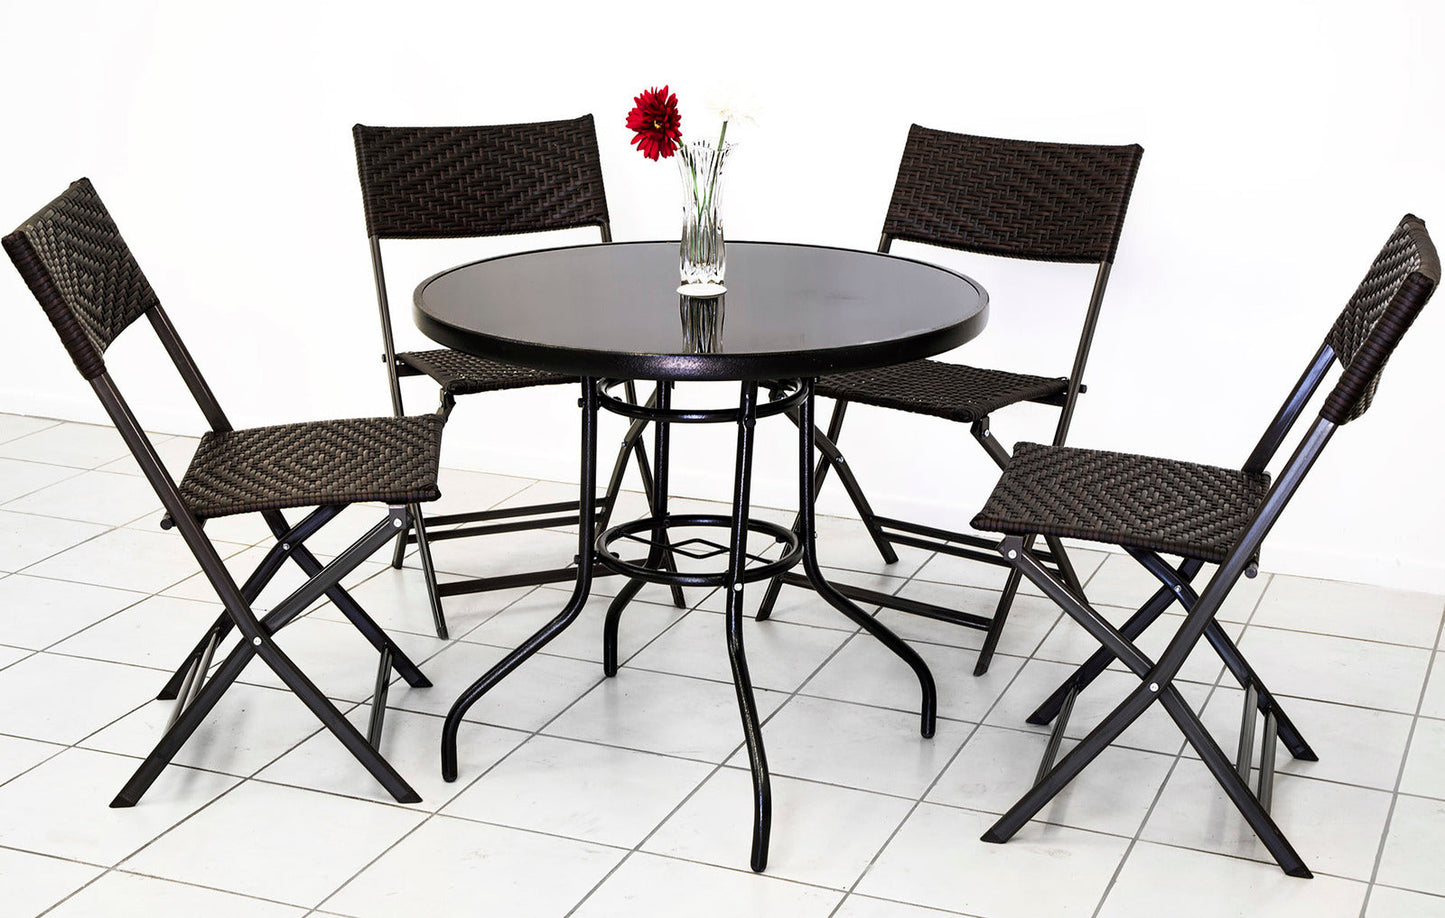 Alfresco 7 Piece Outdoor Setting (Umbrella & Stand, 4 Rattan Chairs, Round Table)